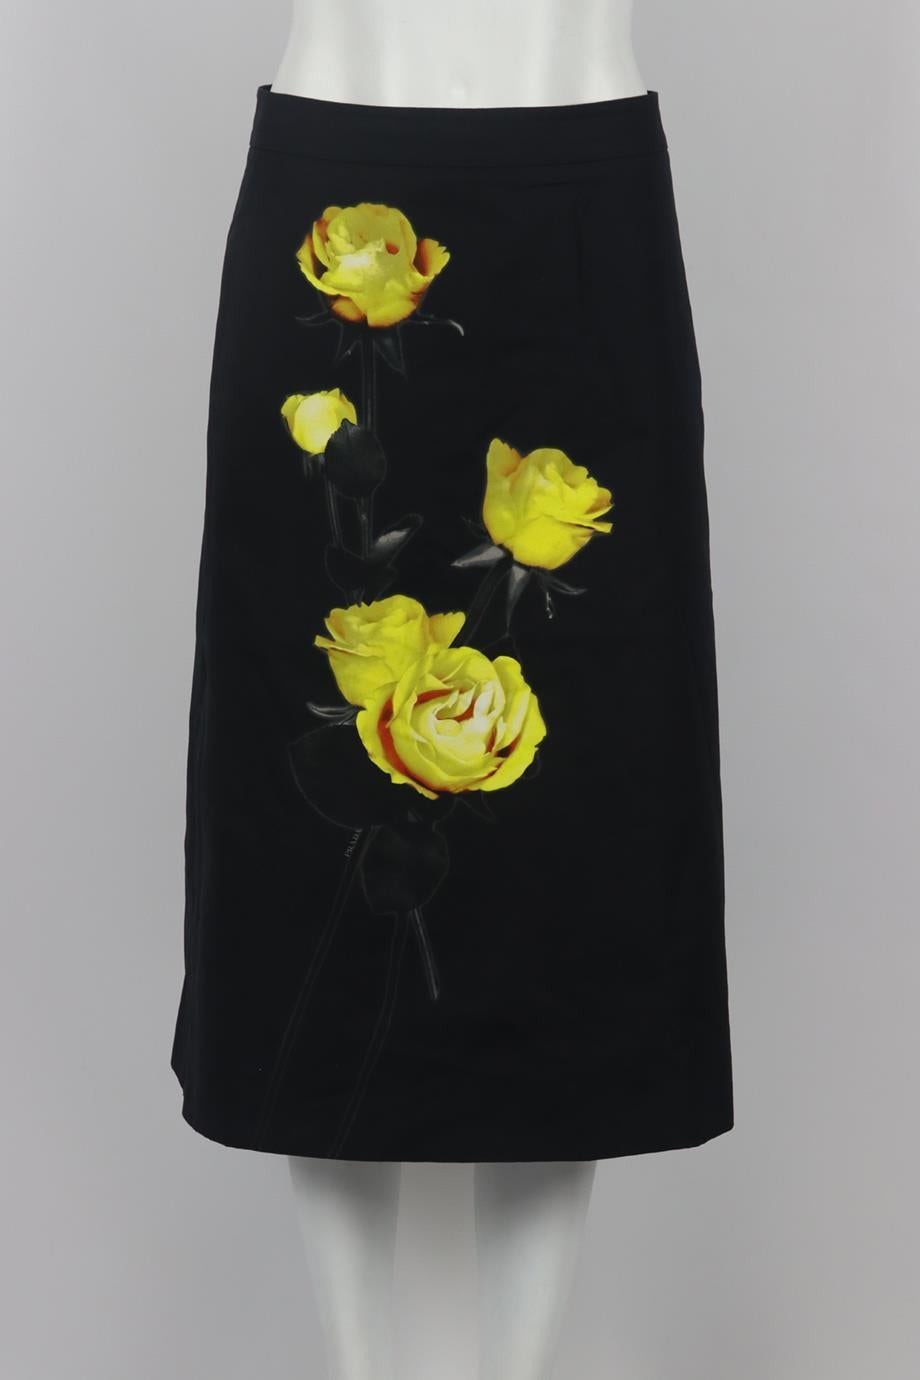 Prada floral print cotton midi skirt. Black. Zip fastening at side. 100% Cotton; lining: 100% viscose. Size: IT 42 (UK 10, US 6, FR 38). Waist: 30 in. Hips: 40.5 in. Length: 29 in. Very good condition - No sign of wear; see pictures.